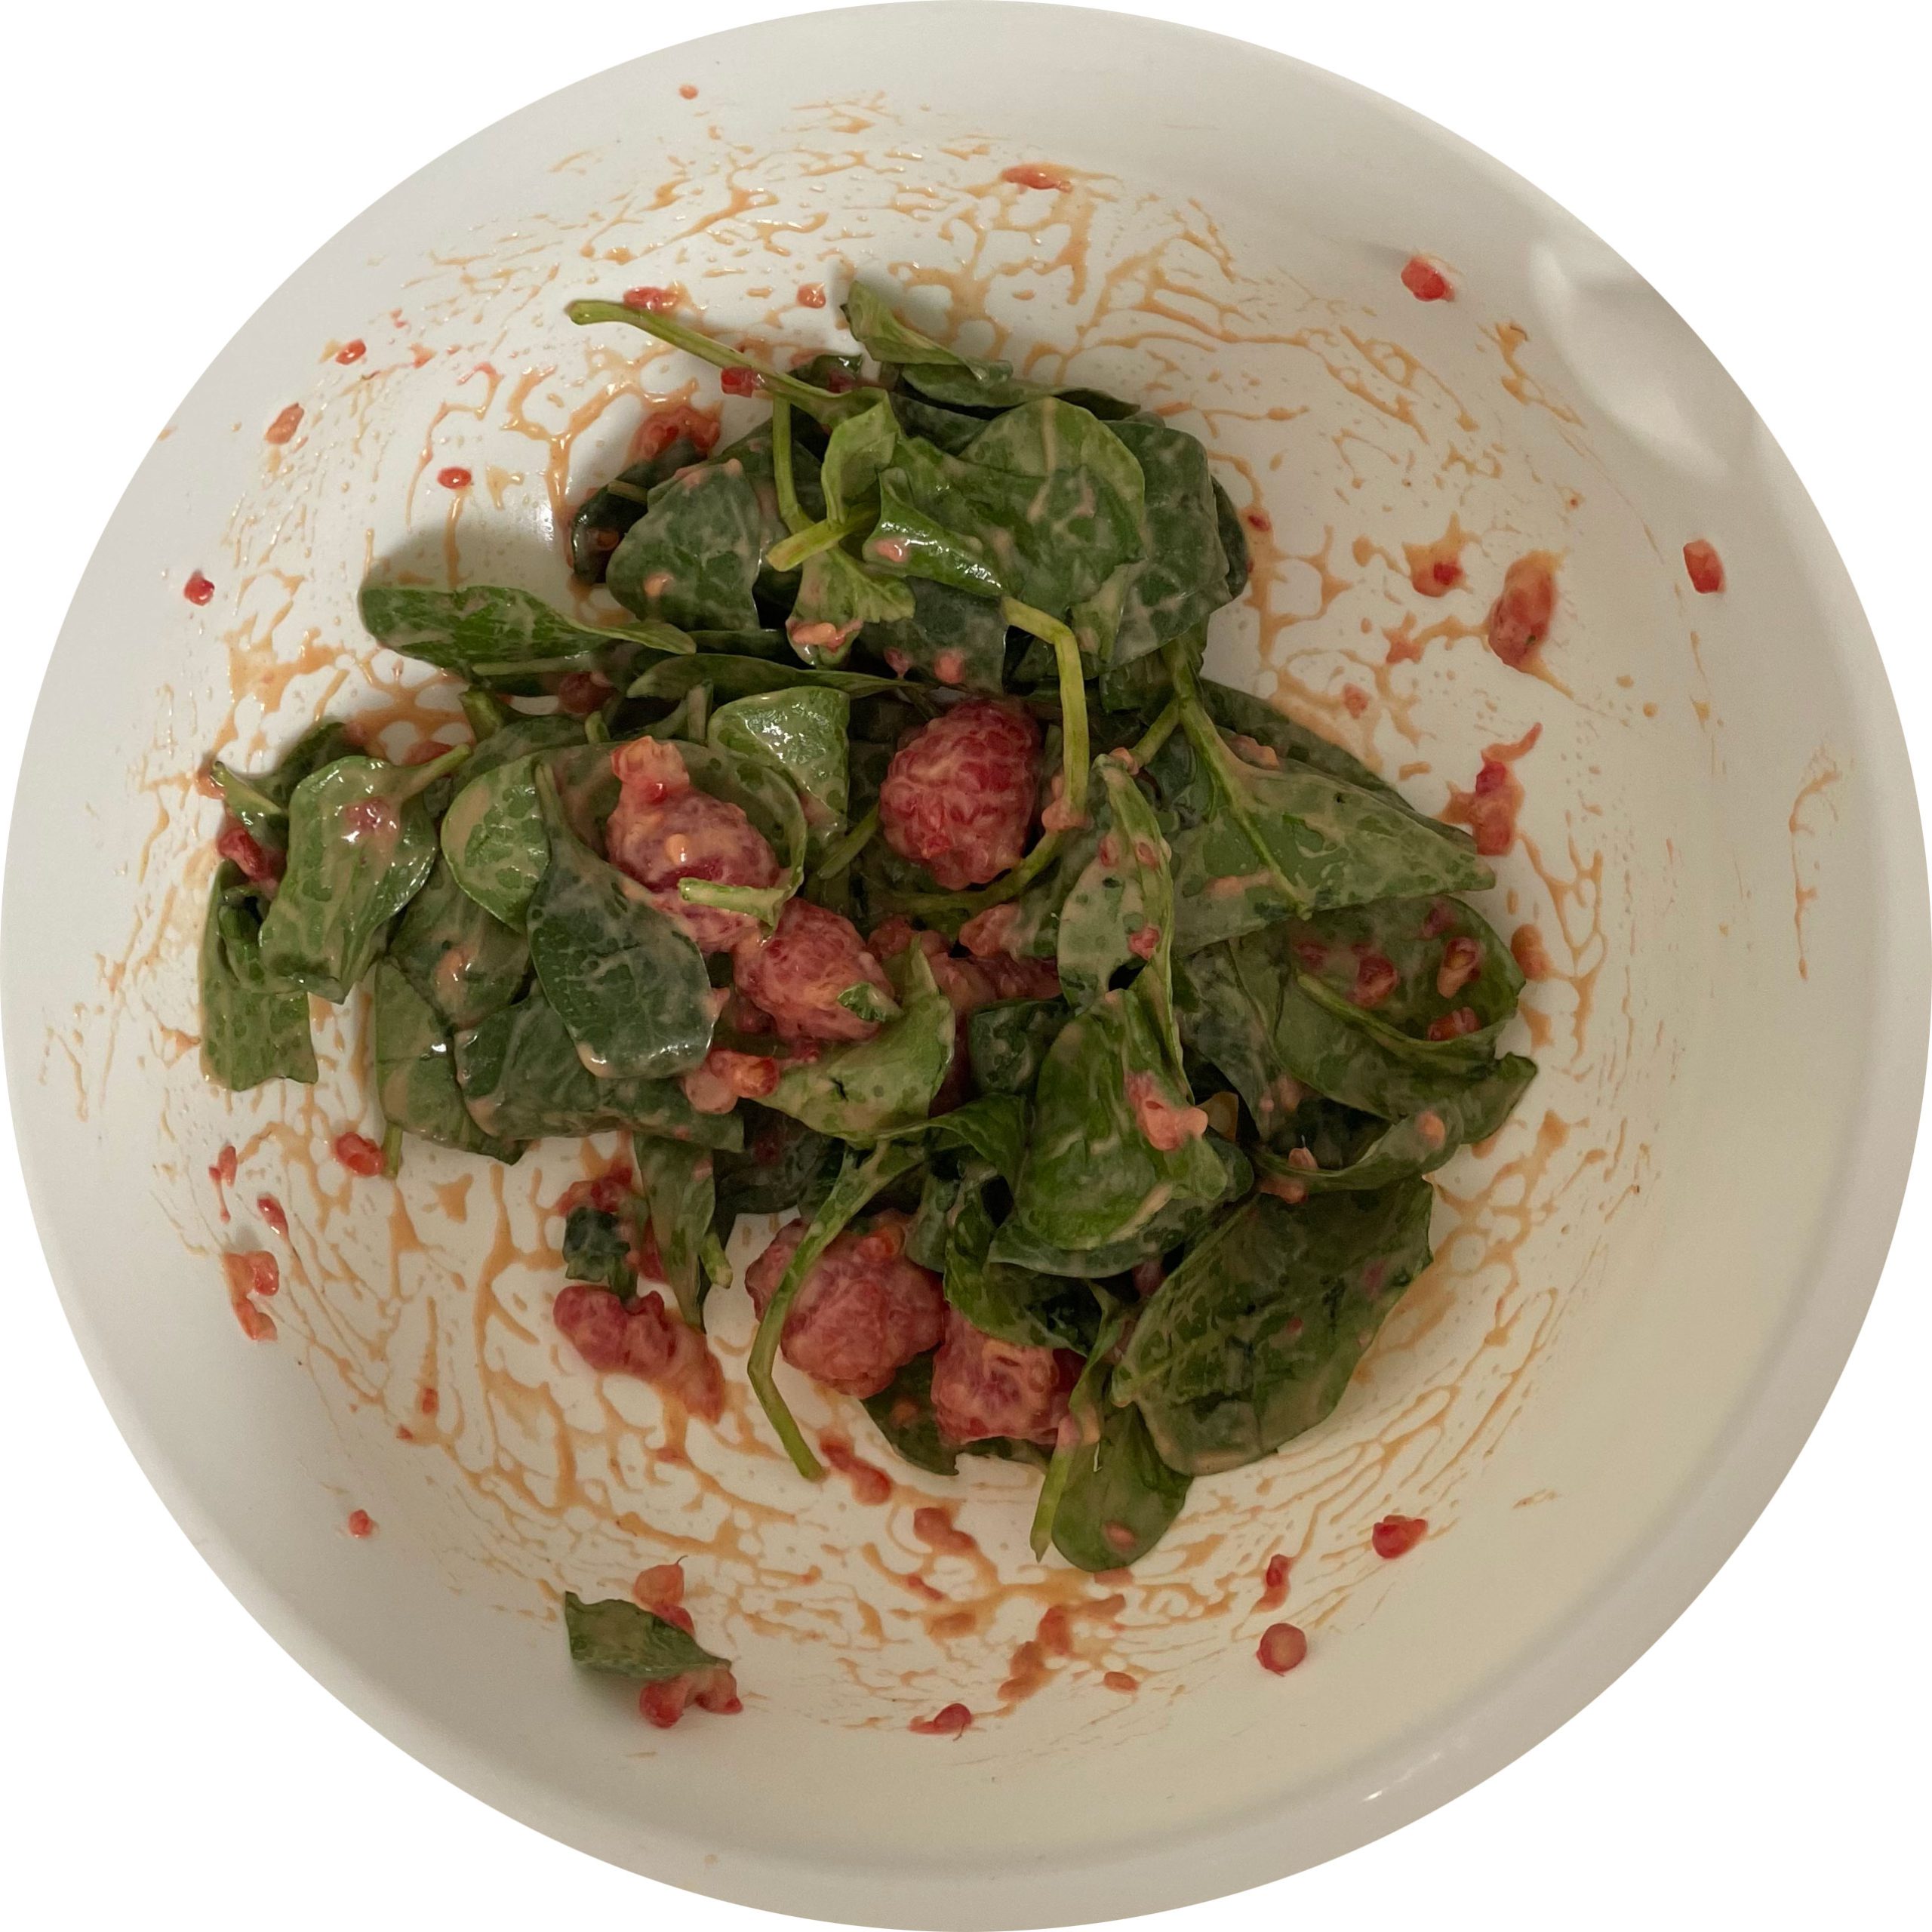 In a mixing bawl, mix baby spinach, remaining raspberries and Dijon - Raspberry dressing.